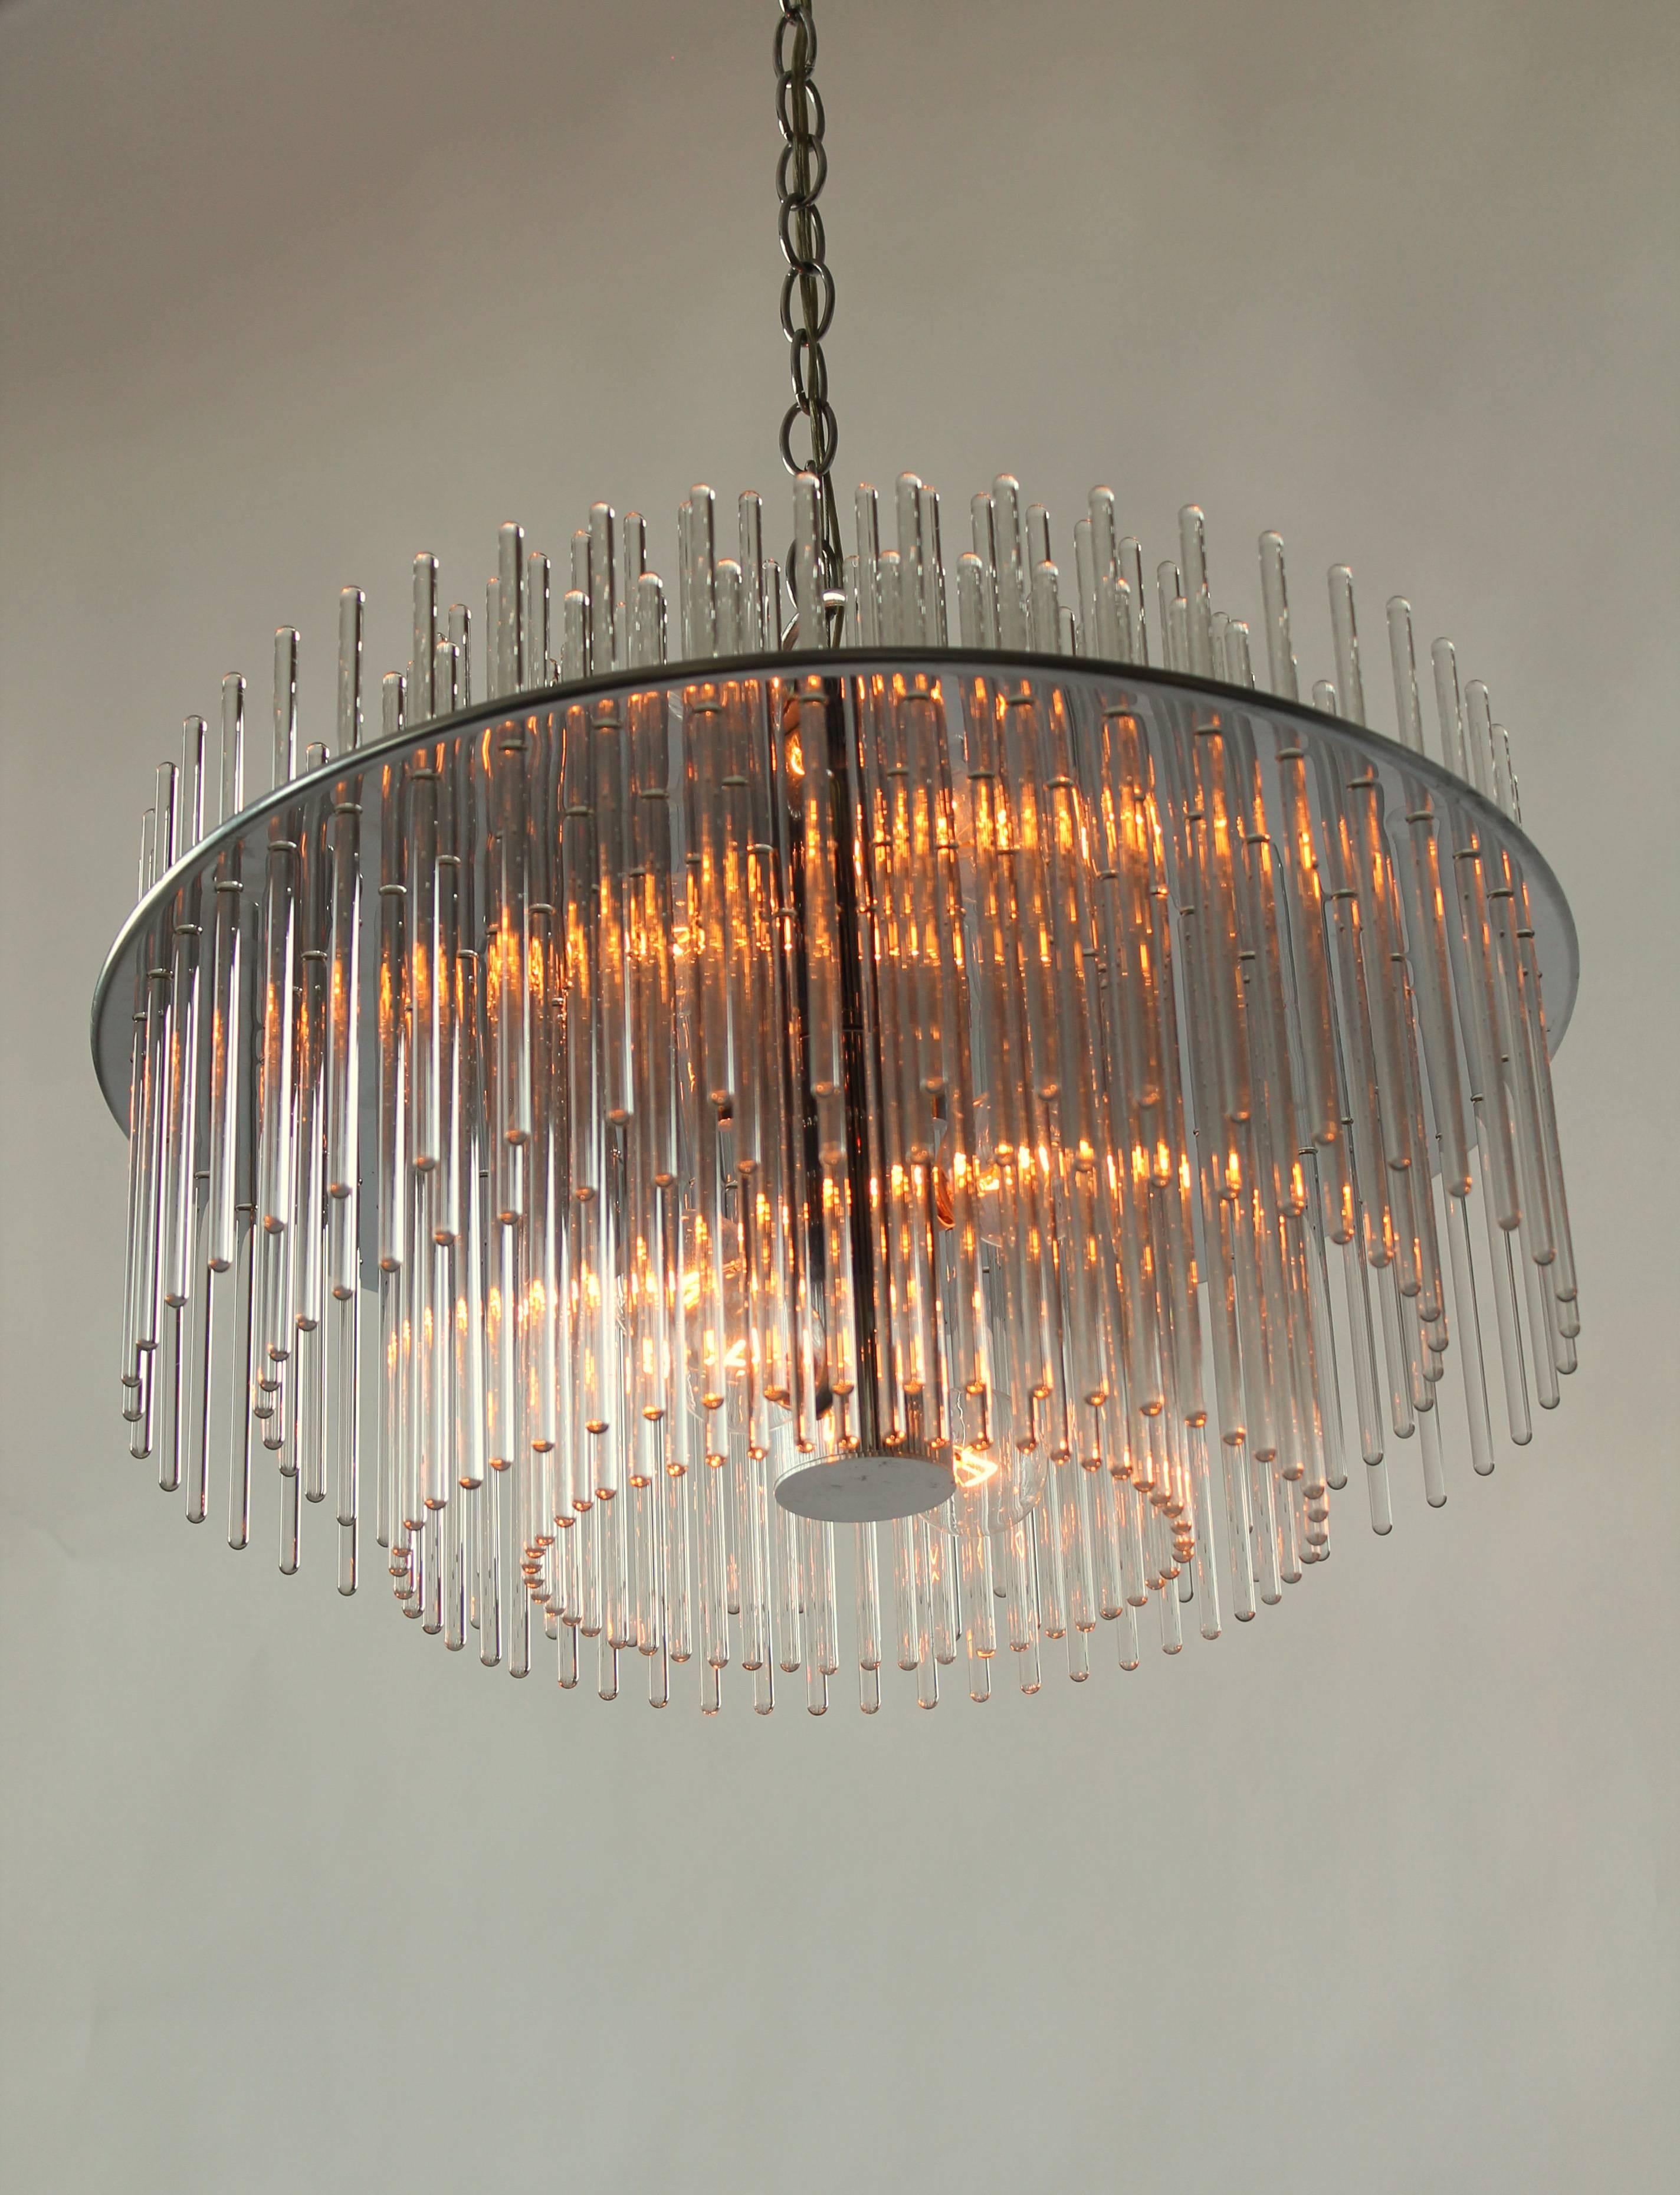 Classic 1980s Lightolier chandelier from their Radiance line.

Four row of light catching optical quality glass rods sitting on a nickel plated pierced steel-plate.

Well made solid construction . 

6 E12 candelabra size socket rated at 40